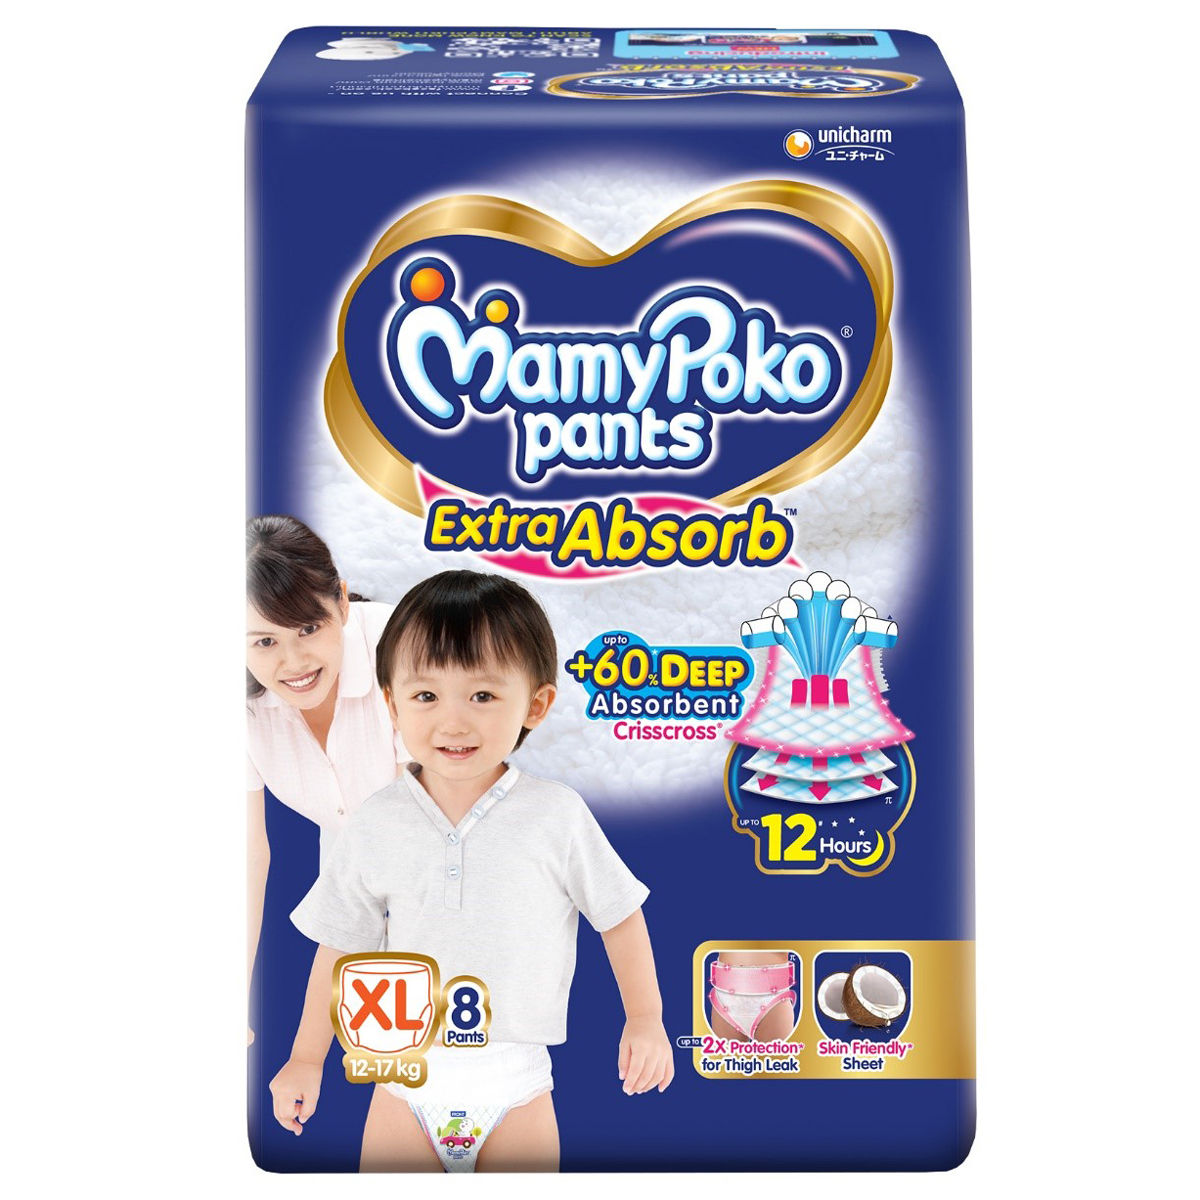 MamyPoko Pants India - Wrap your baby in comfortable pant style diapers and  watch them revel in joy. #wrap #wraps #Wrapped #wrapping #pants #diapers # diaper #watch #REVEL #joy #joyful #mamy #mamypoko #mamys #